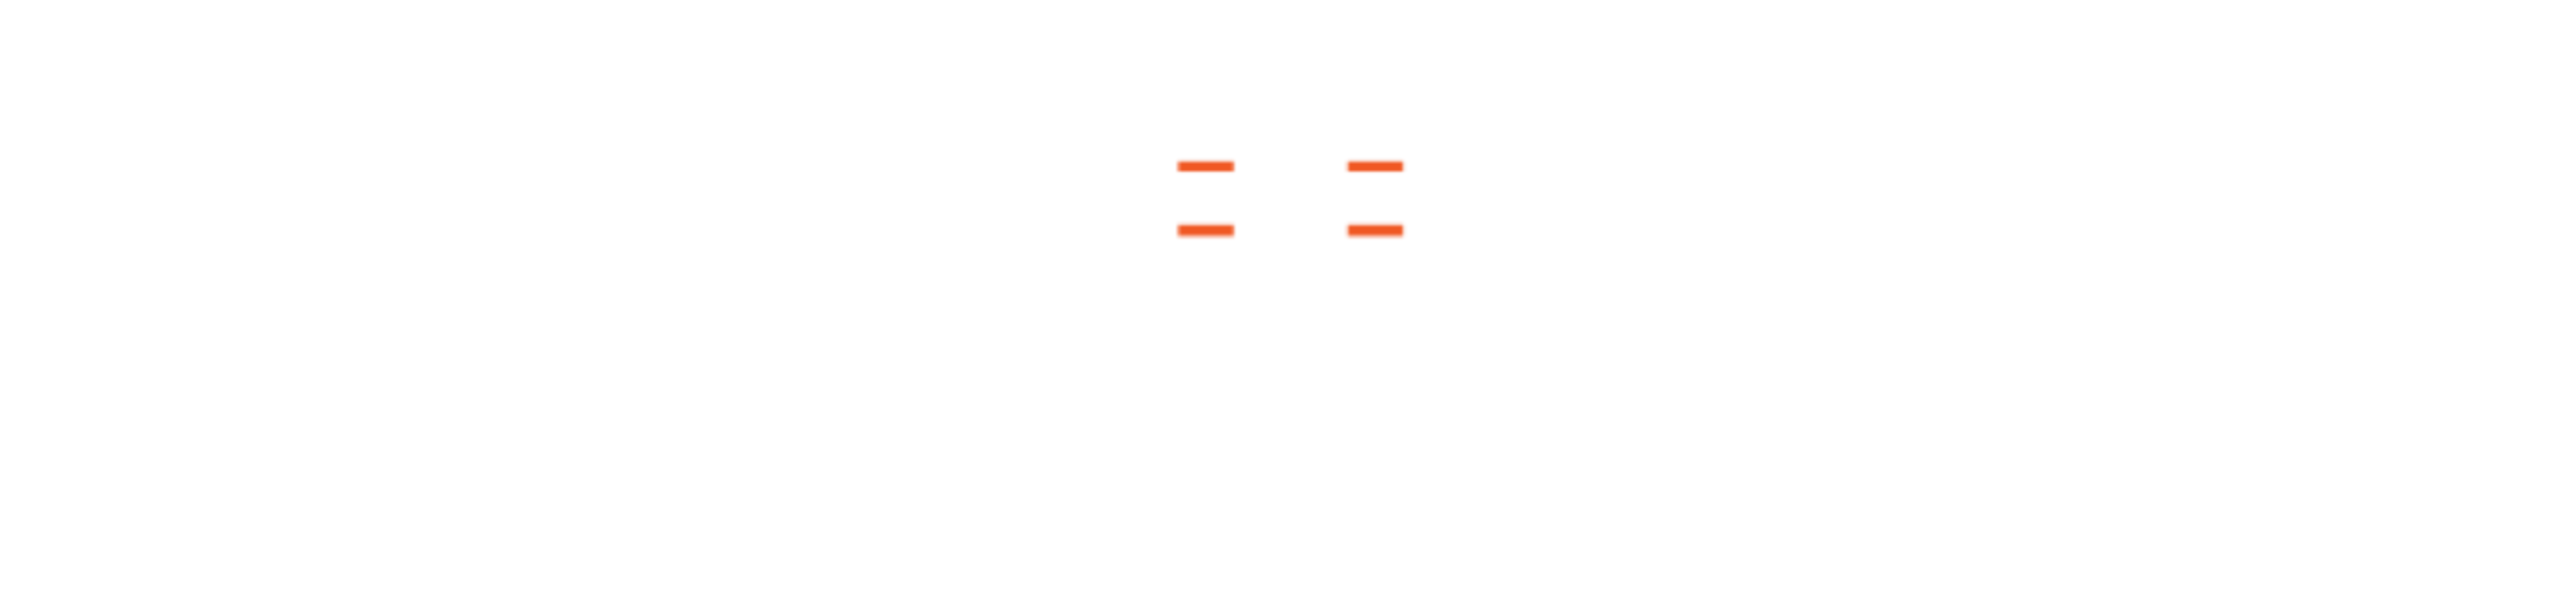 Future Fires